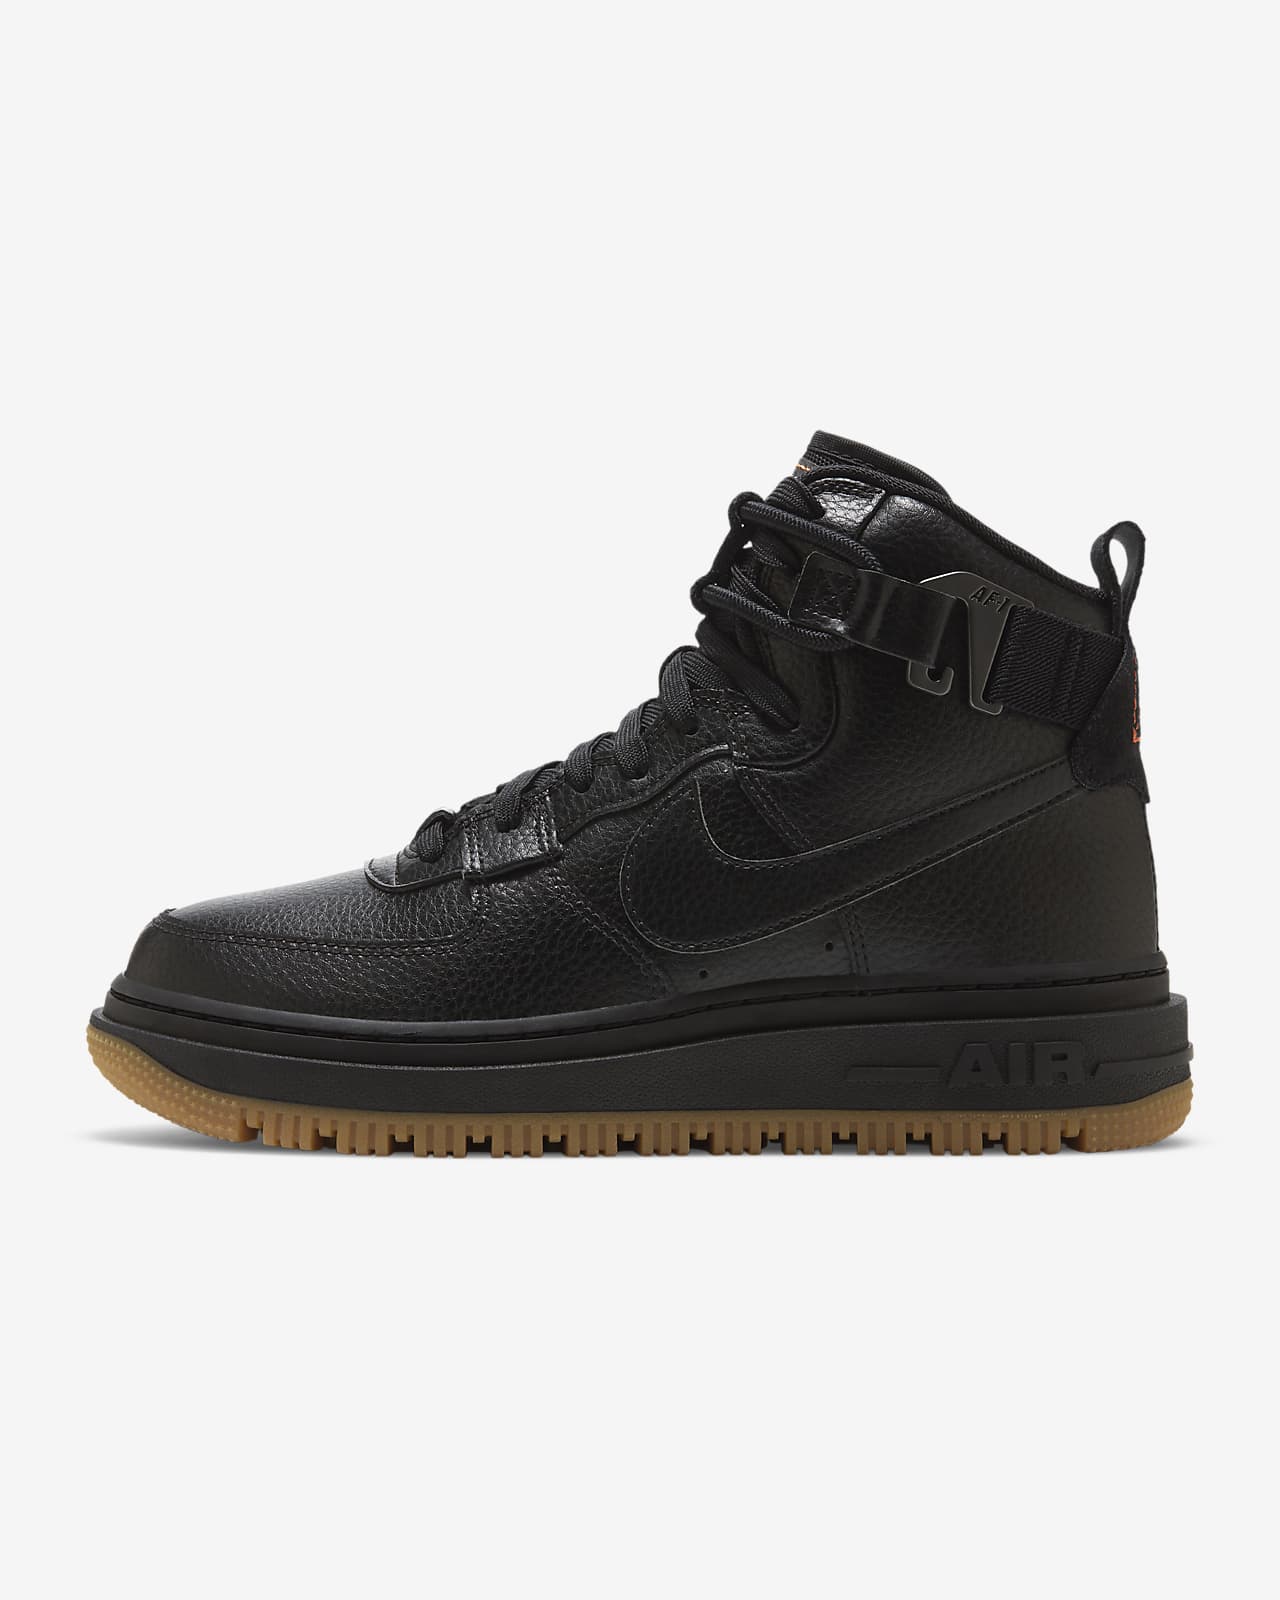 Botte Nike Air Force 1 High Utility 2.0 pour Femme